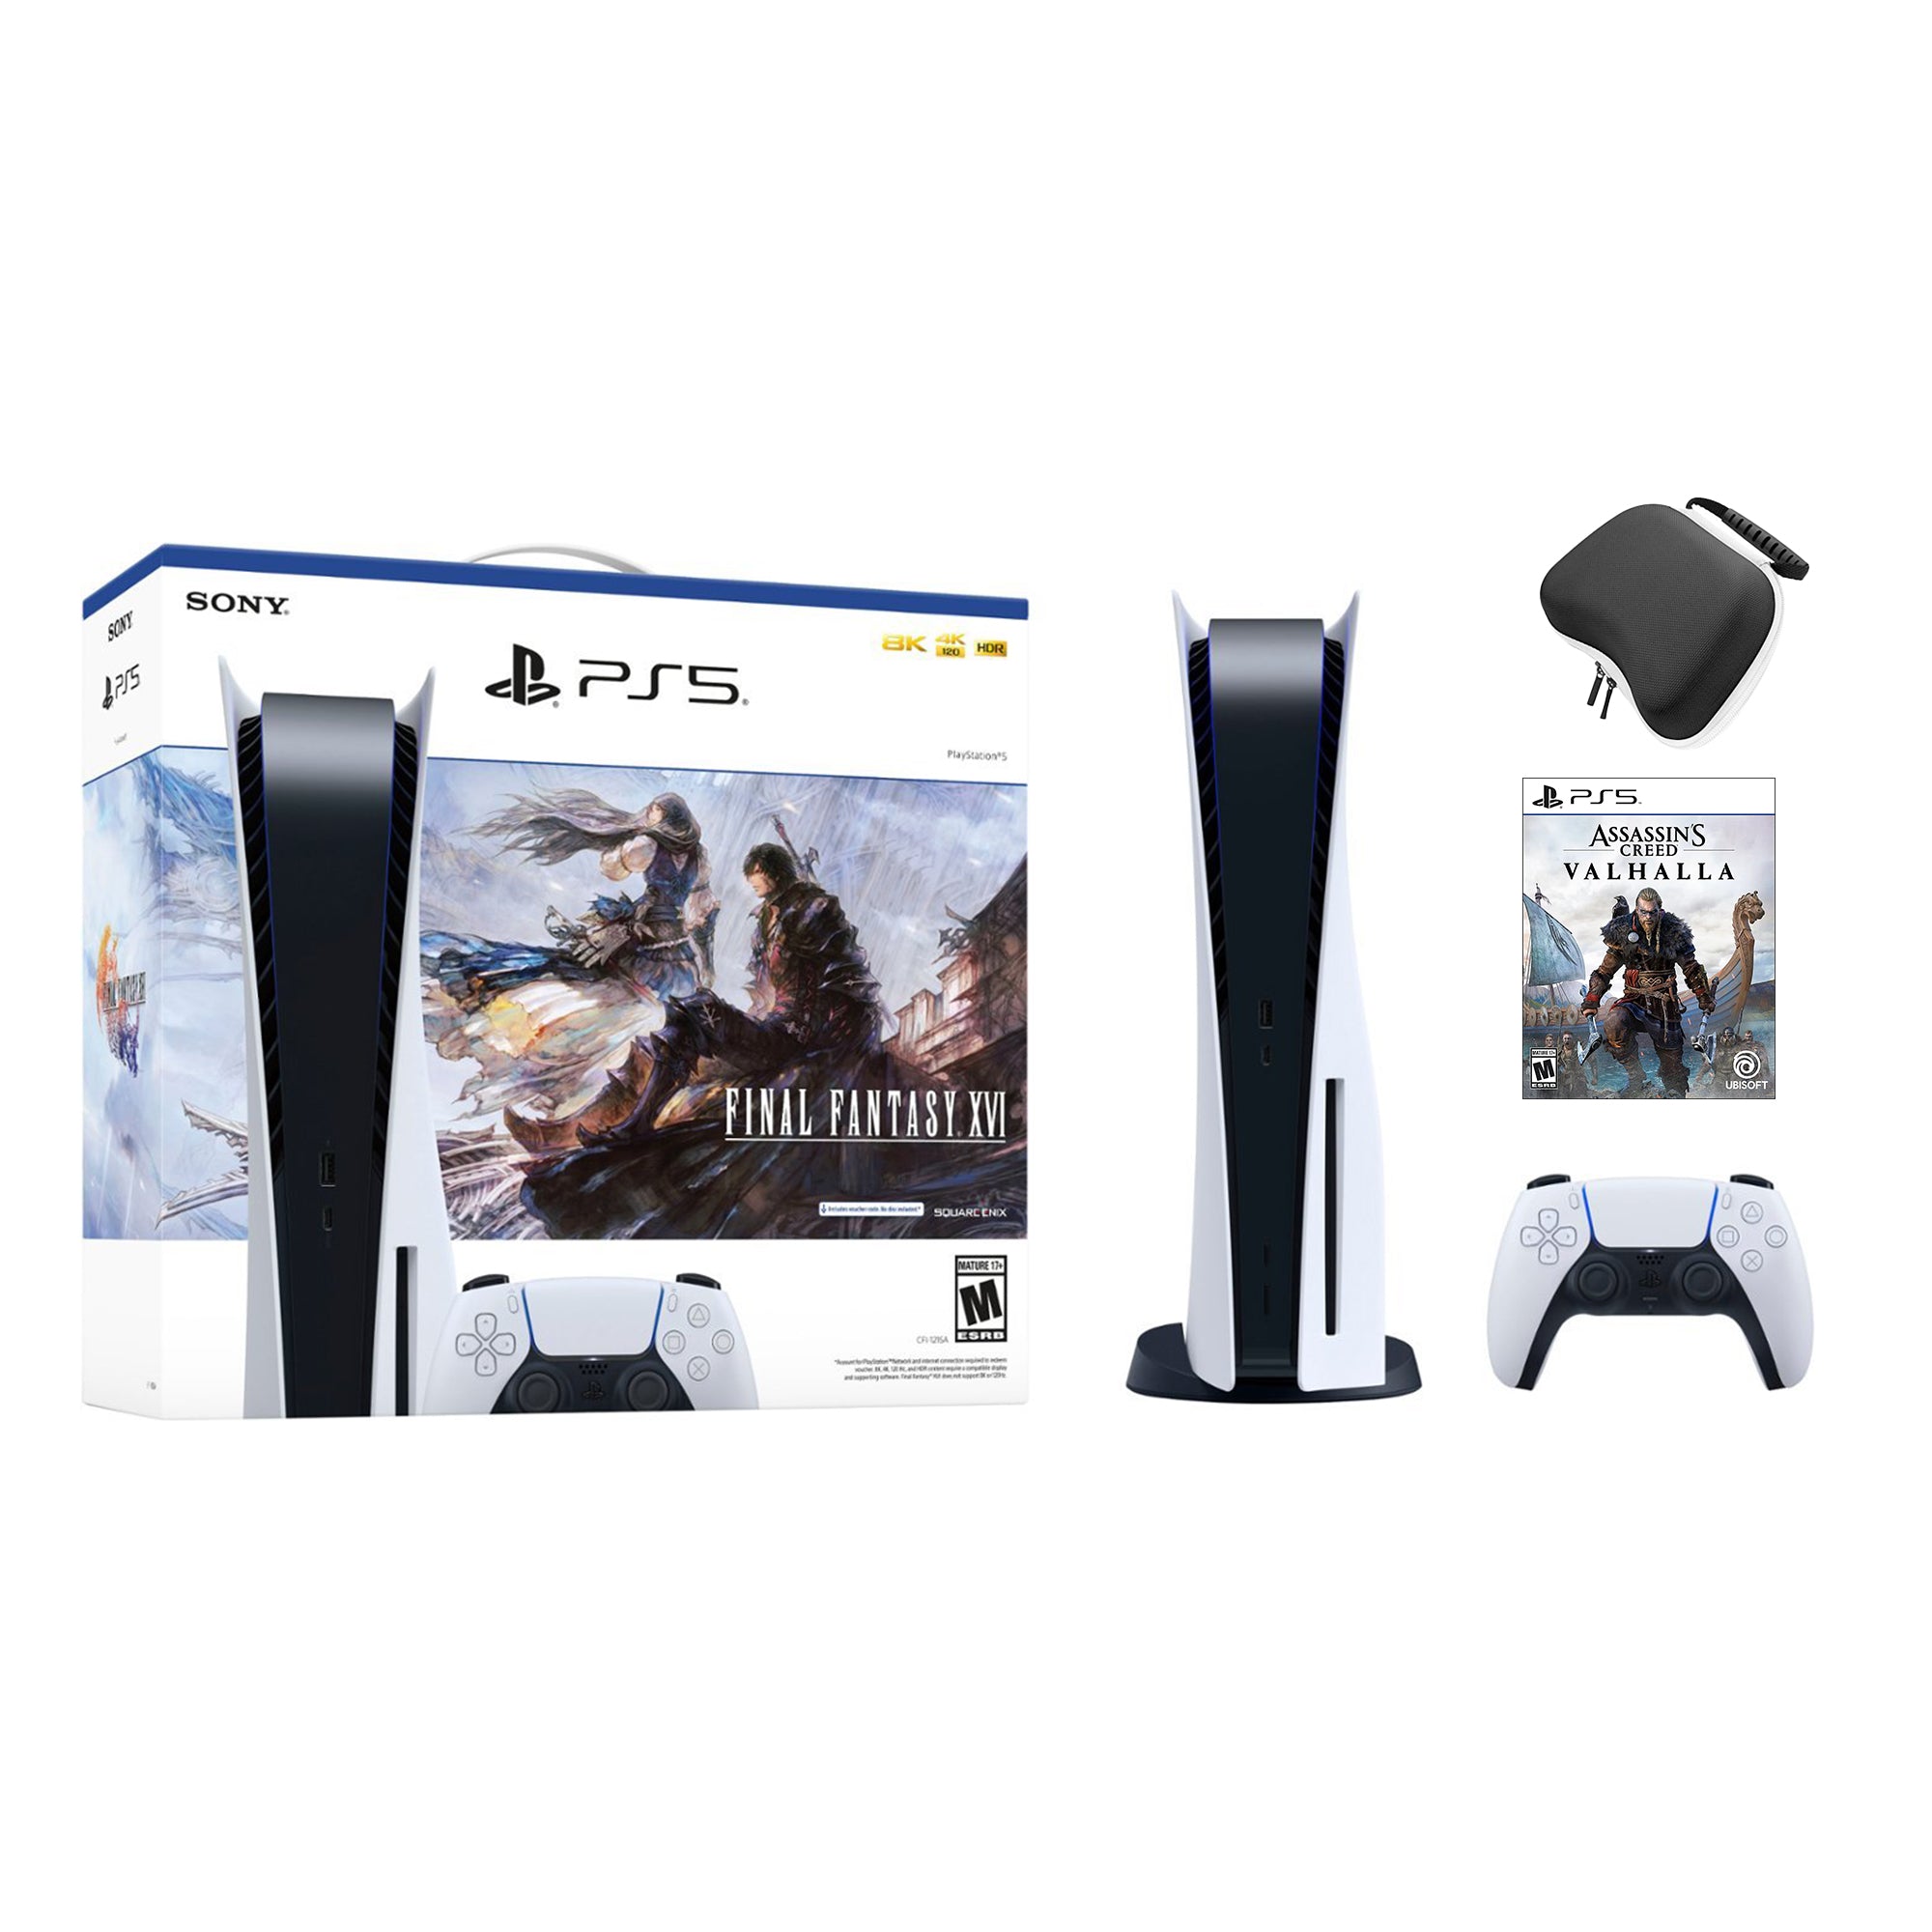 Playstation 5 Disc Edition FINAL FANTASY XVI Bundle with Assassin's Creed Valhalla and Mytrix Controller Case - PS5, White